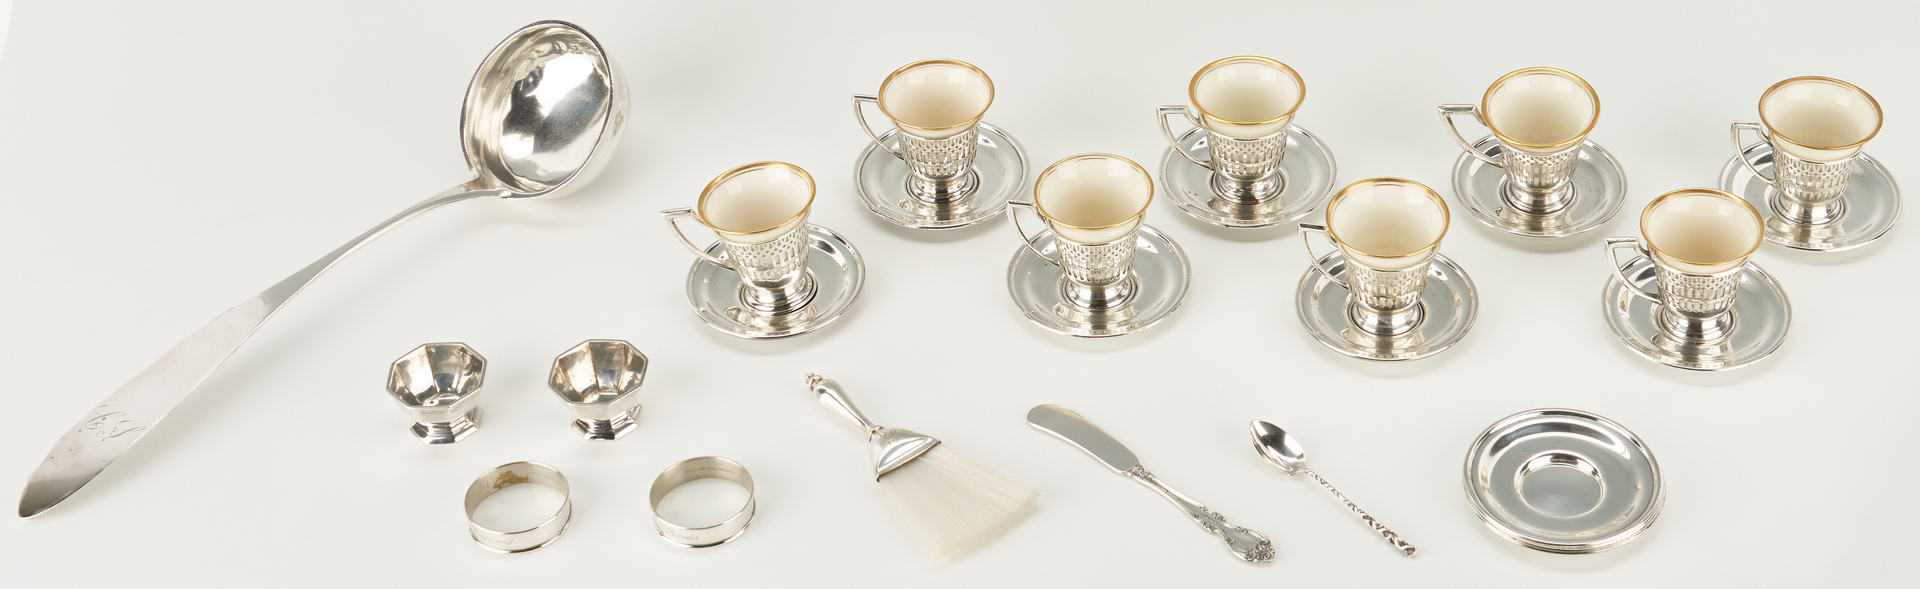 Lot 821: 16 Silver Items incl. Demitasse Cups w/ Sterling Holders, Ladle